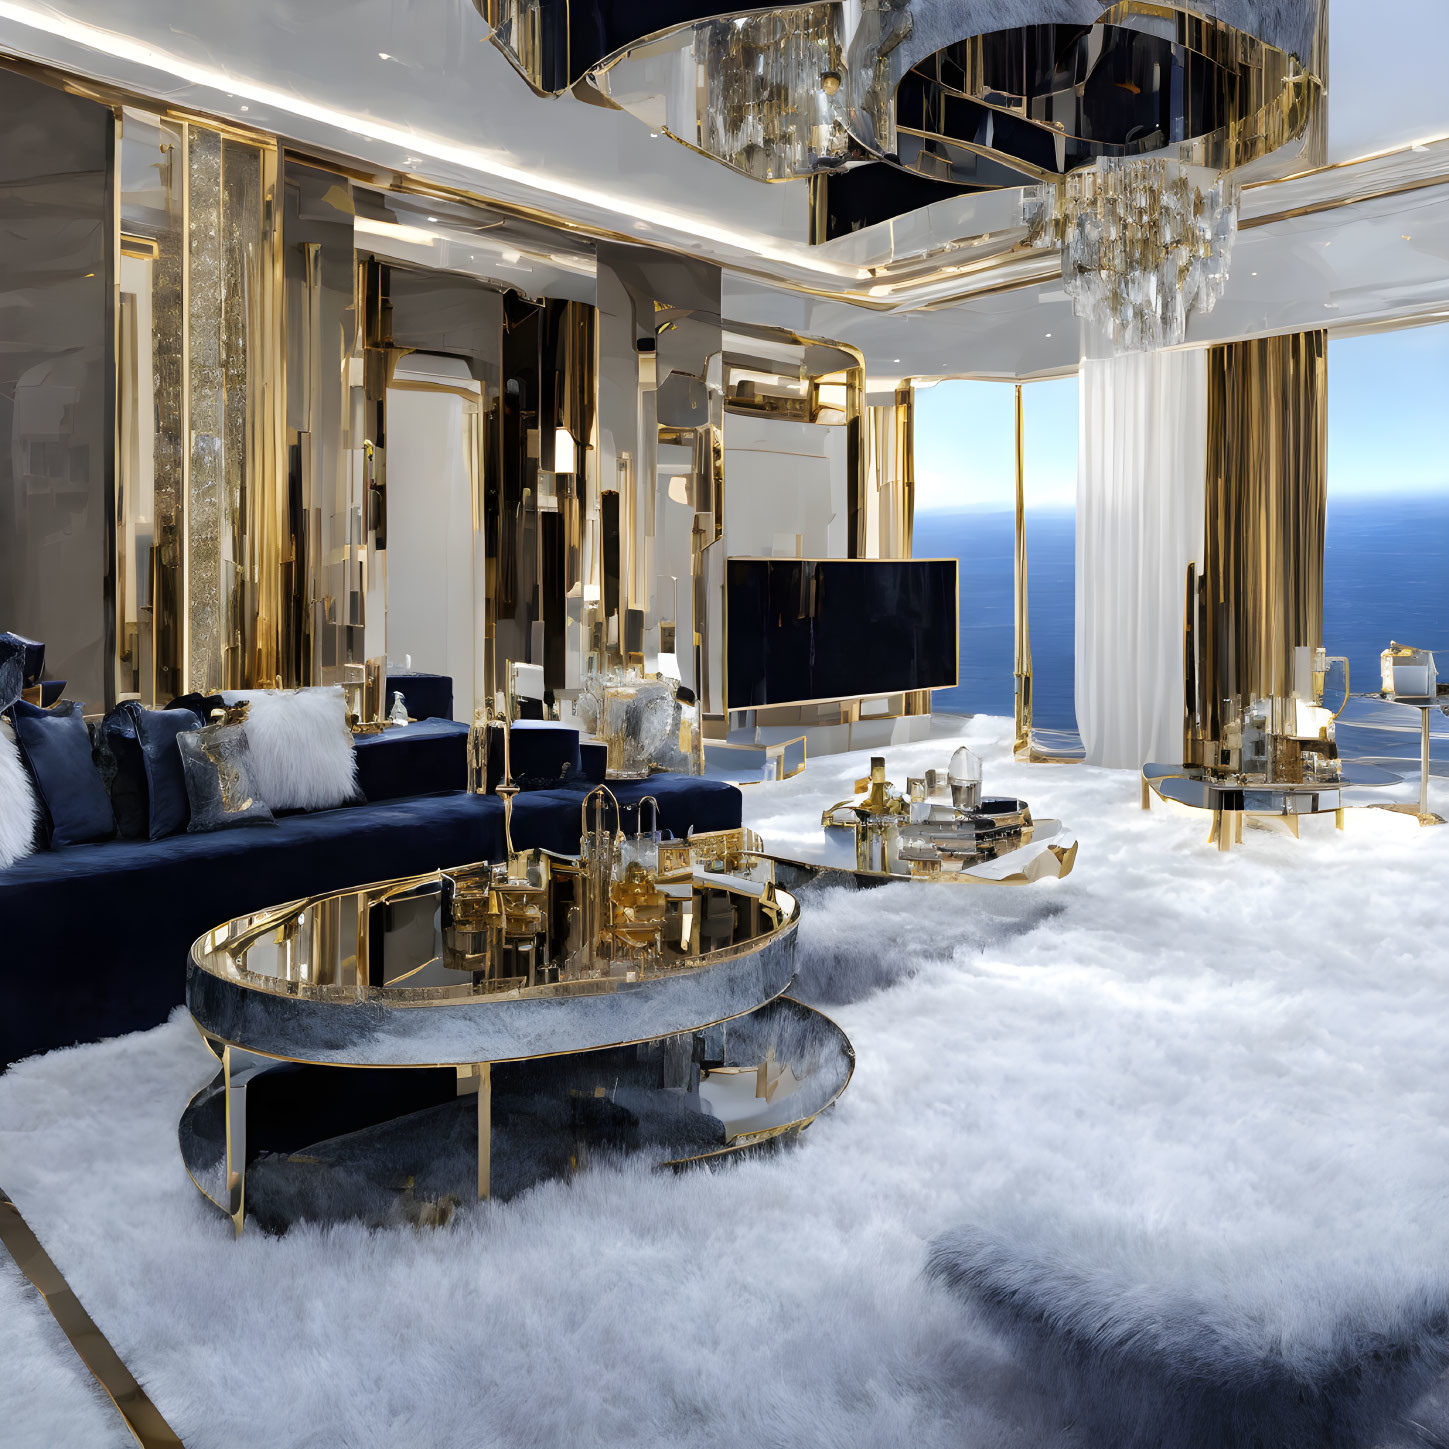 Opulent Interior with Gold Accents and Ocean View